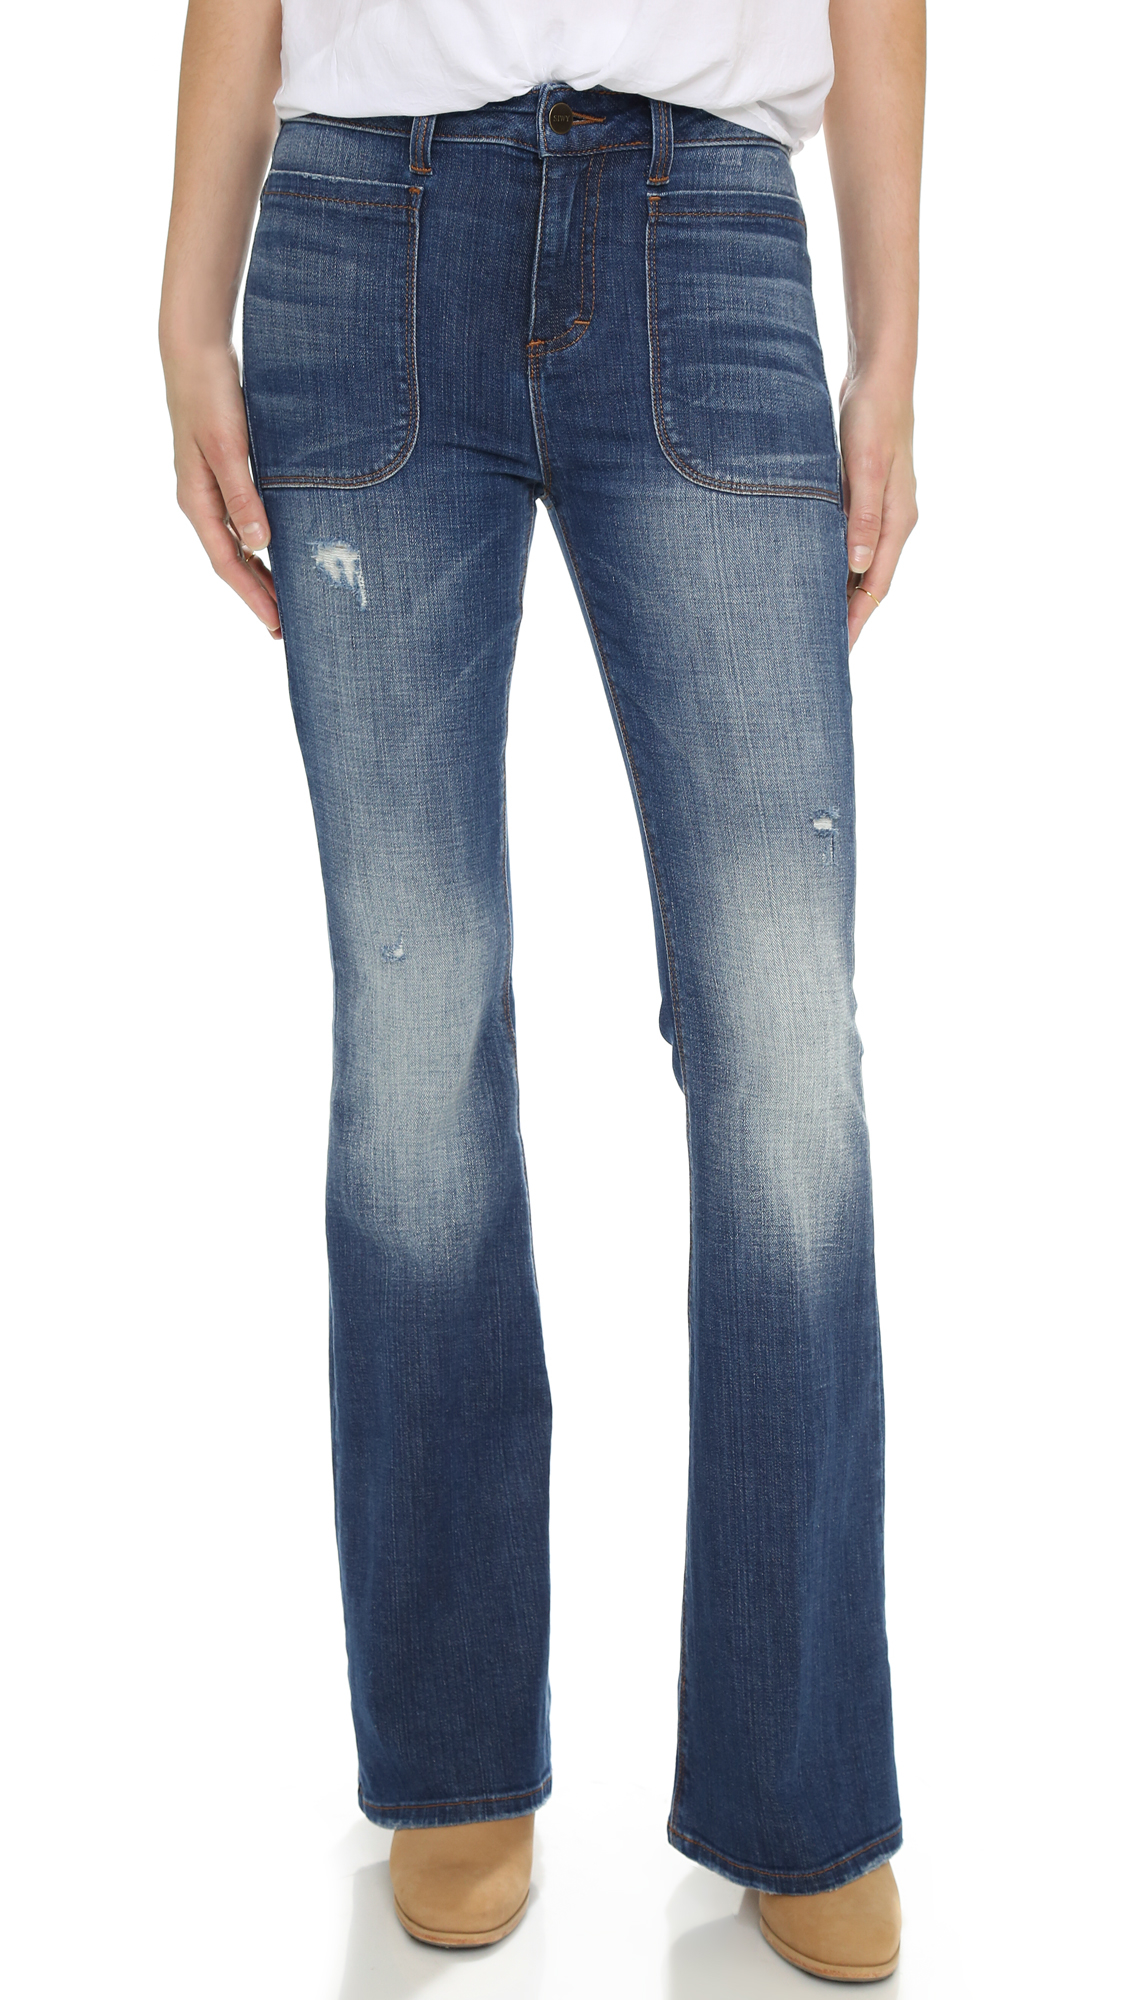 Lyst - Siwy Melissa High Waisted Flare Jeans - Journey To Nirvana in Blue